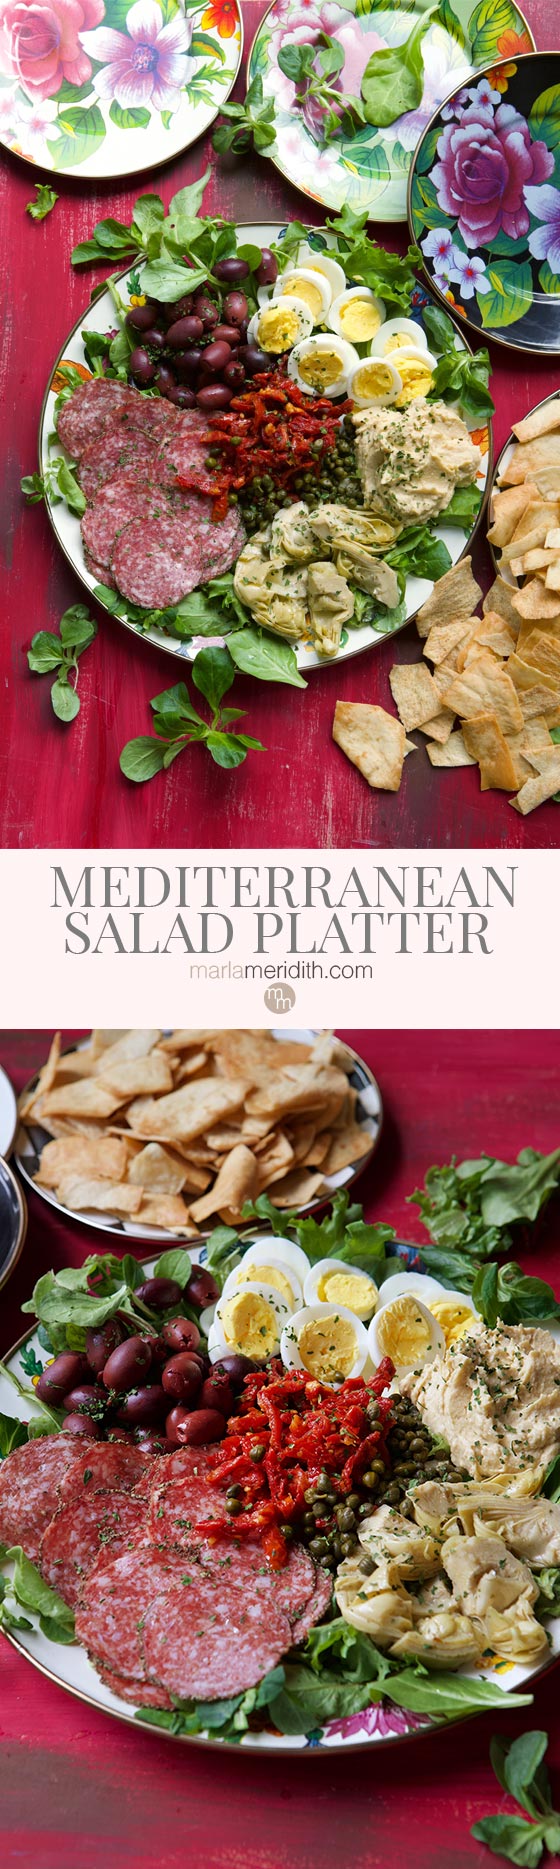 Make this simple & delicious Mediterranean Salad Platter next time you throw a party! MarlaMeridith.com